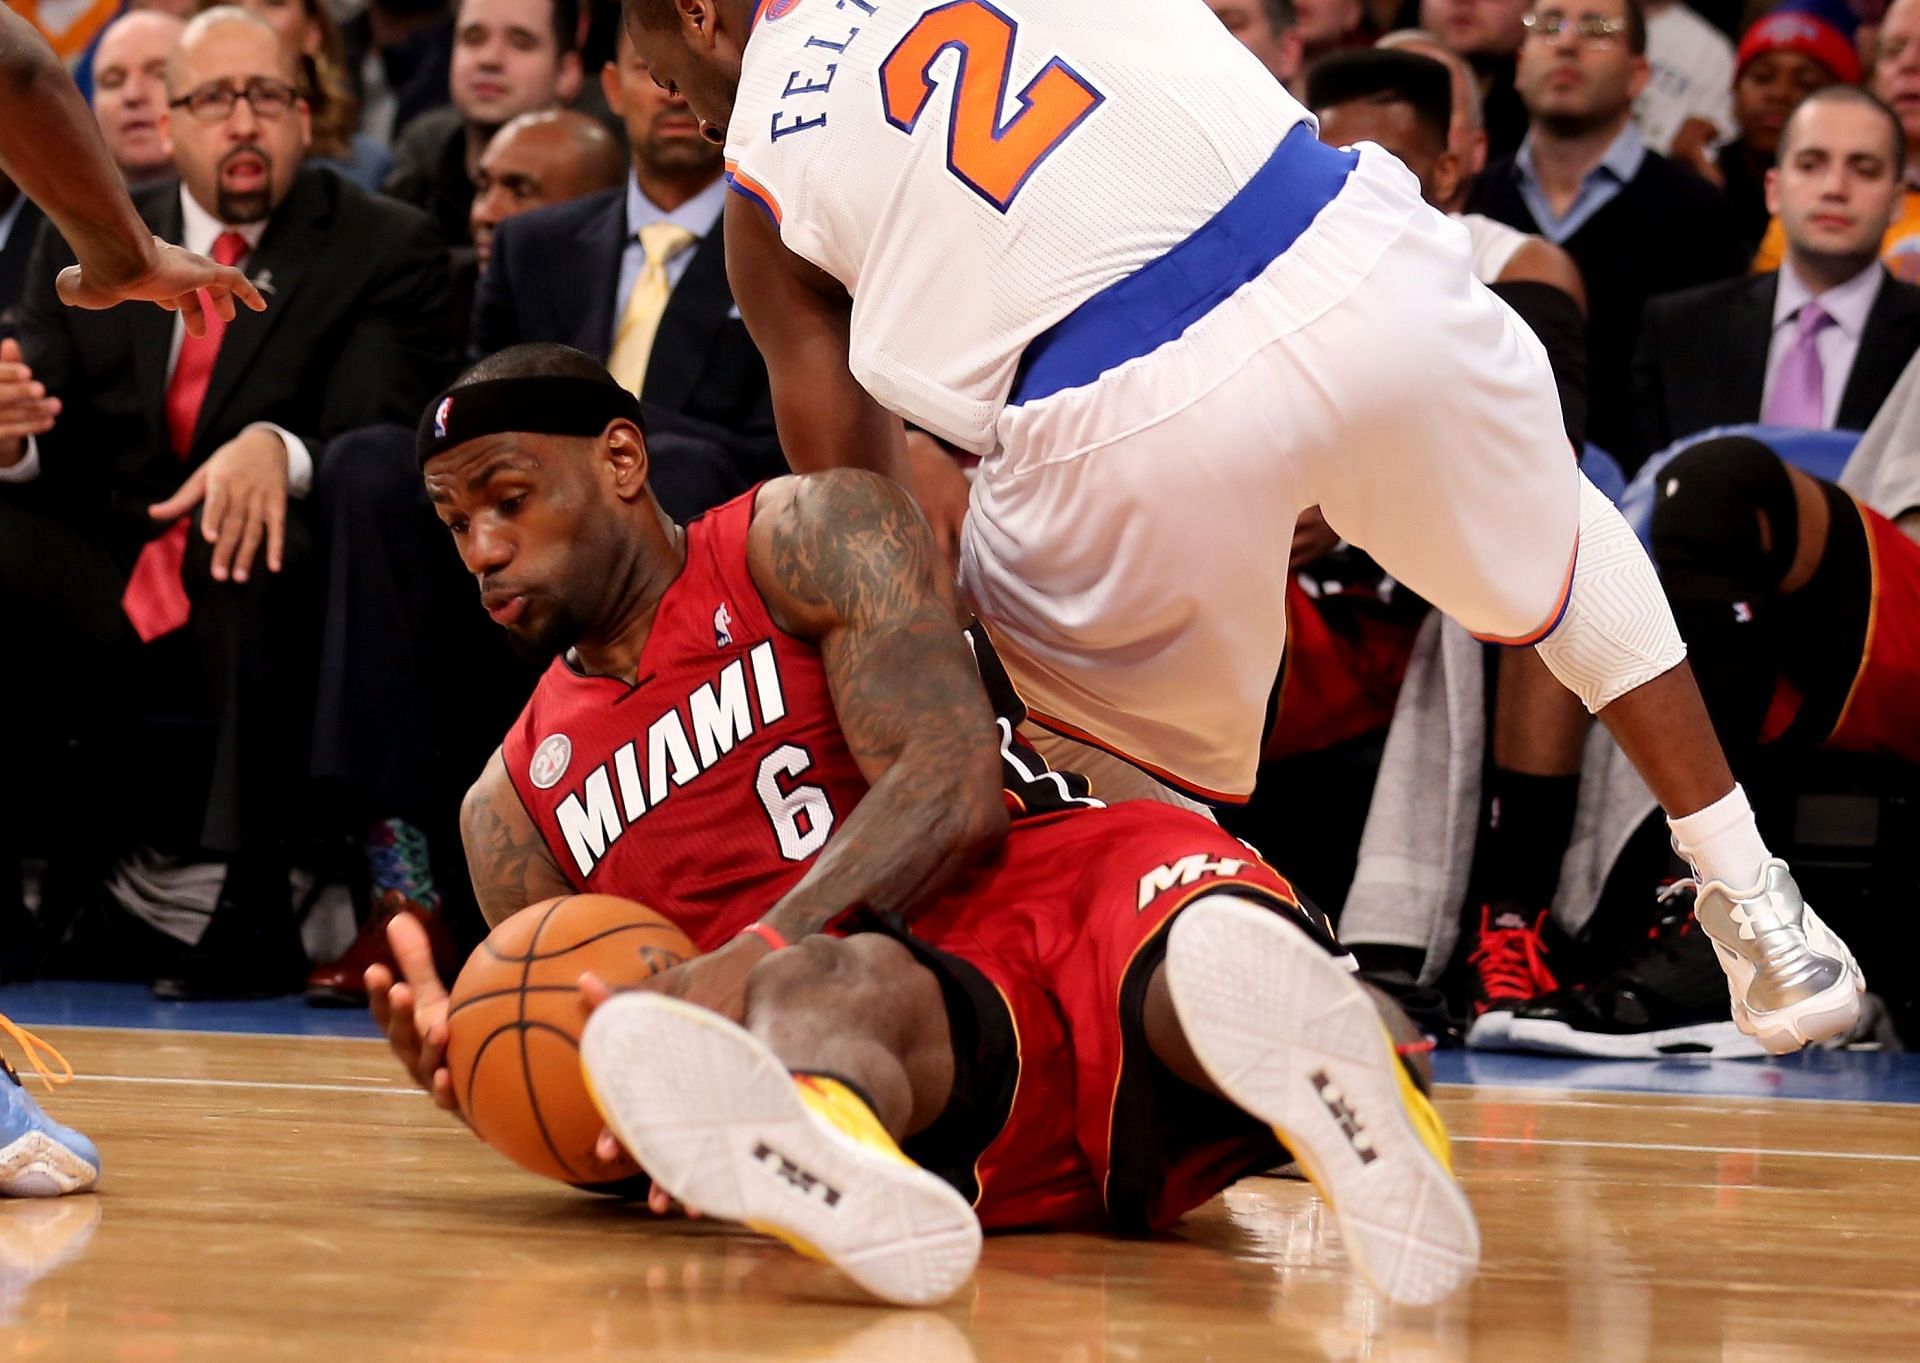 LeBron James dives for the loose ball against the New York Knicks.